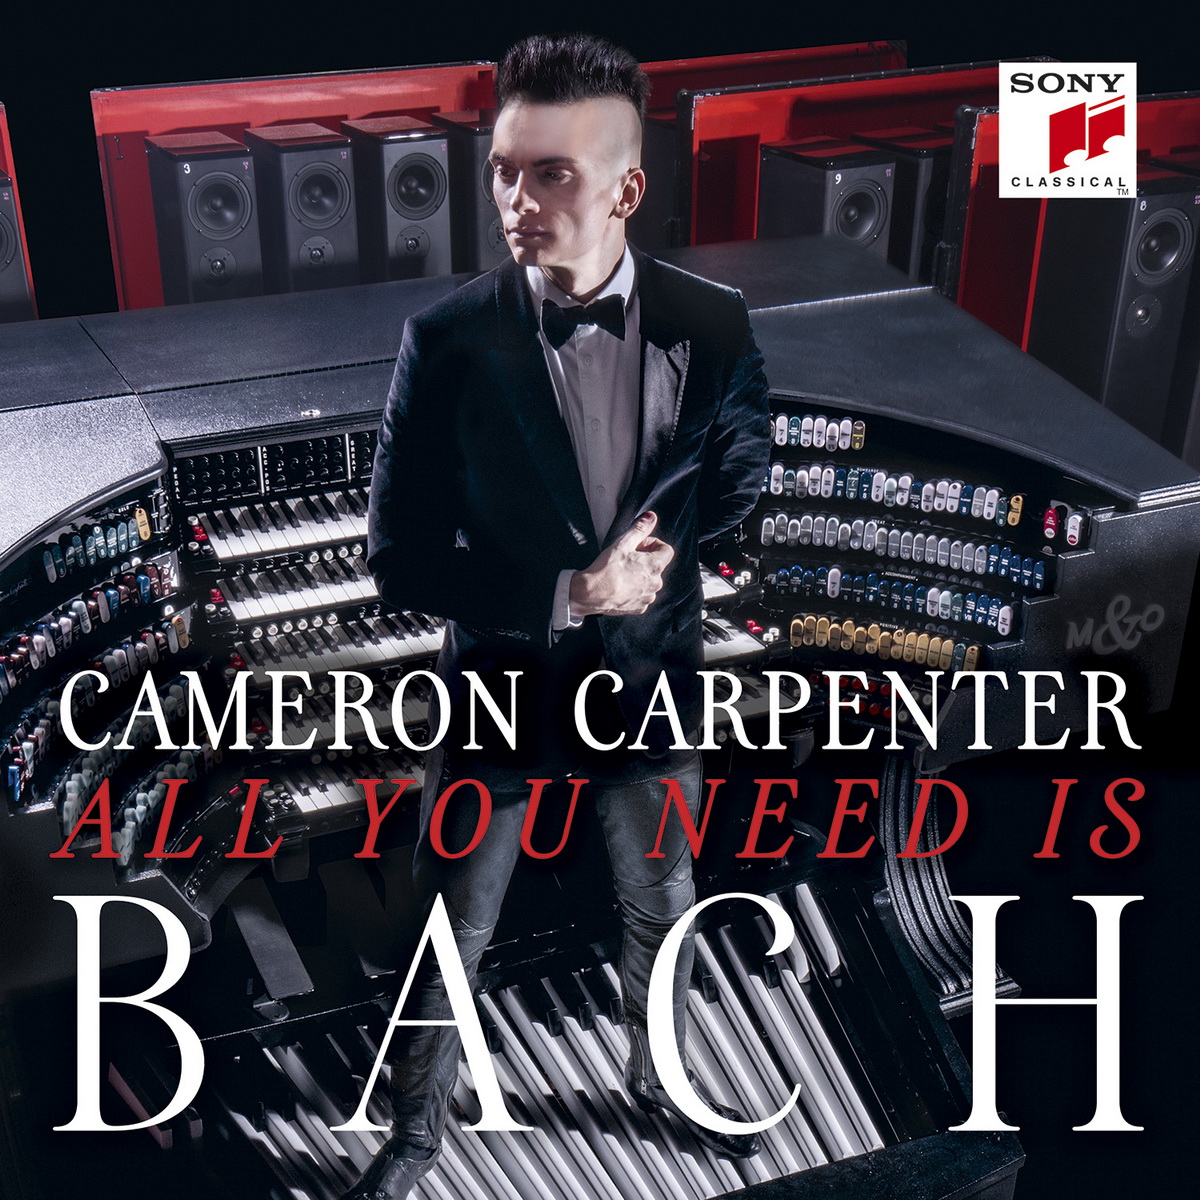 Cameron Carpenter – All You Need is Bach (2016) [FLAC 24bit/96kHz]